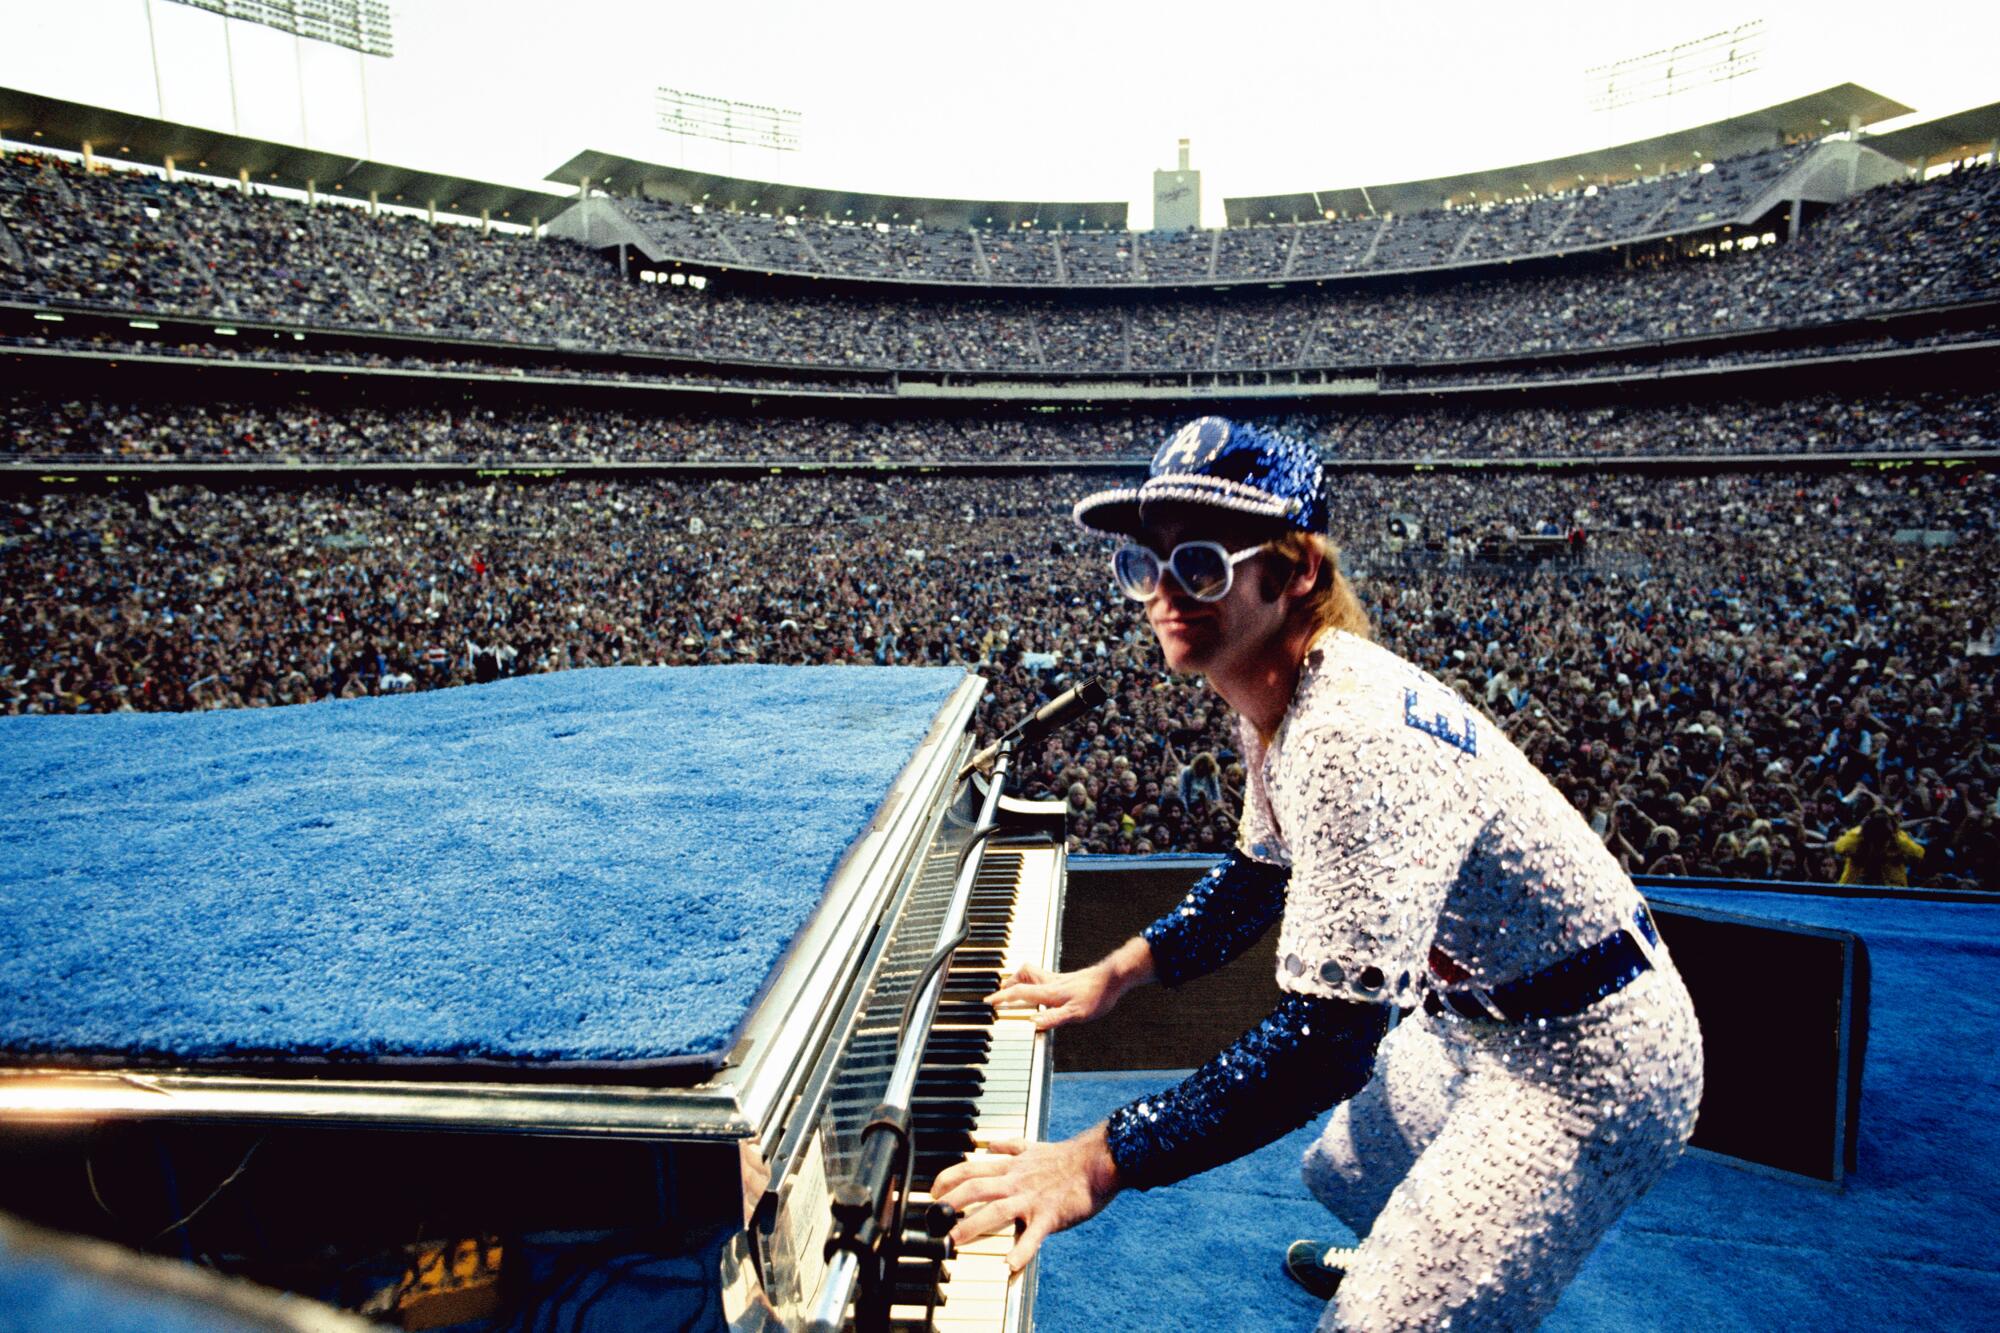 Elton John in a sequined Dodgers uniform plays the piano in front of a stadium full of fans.